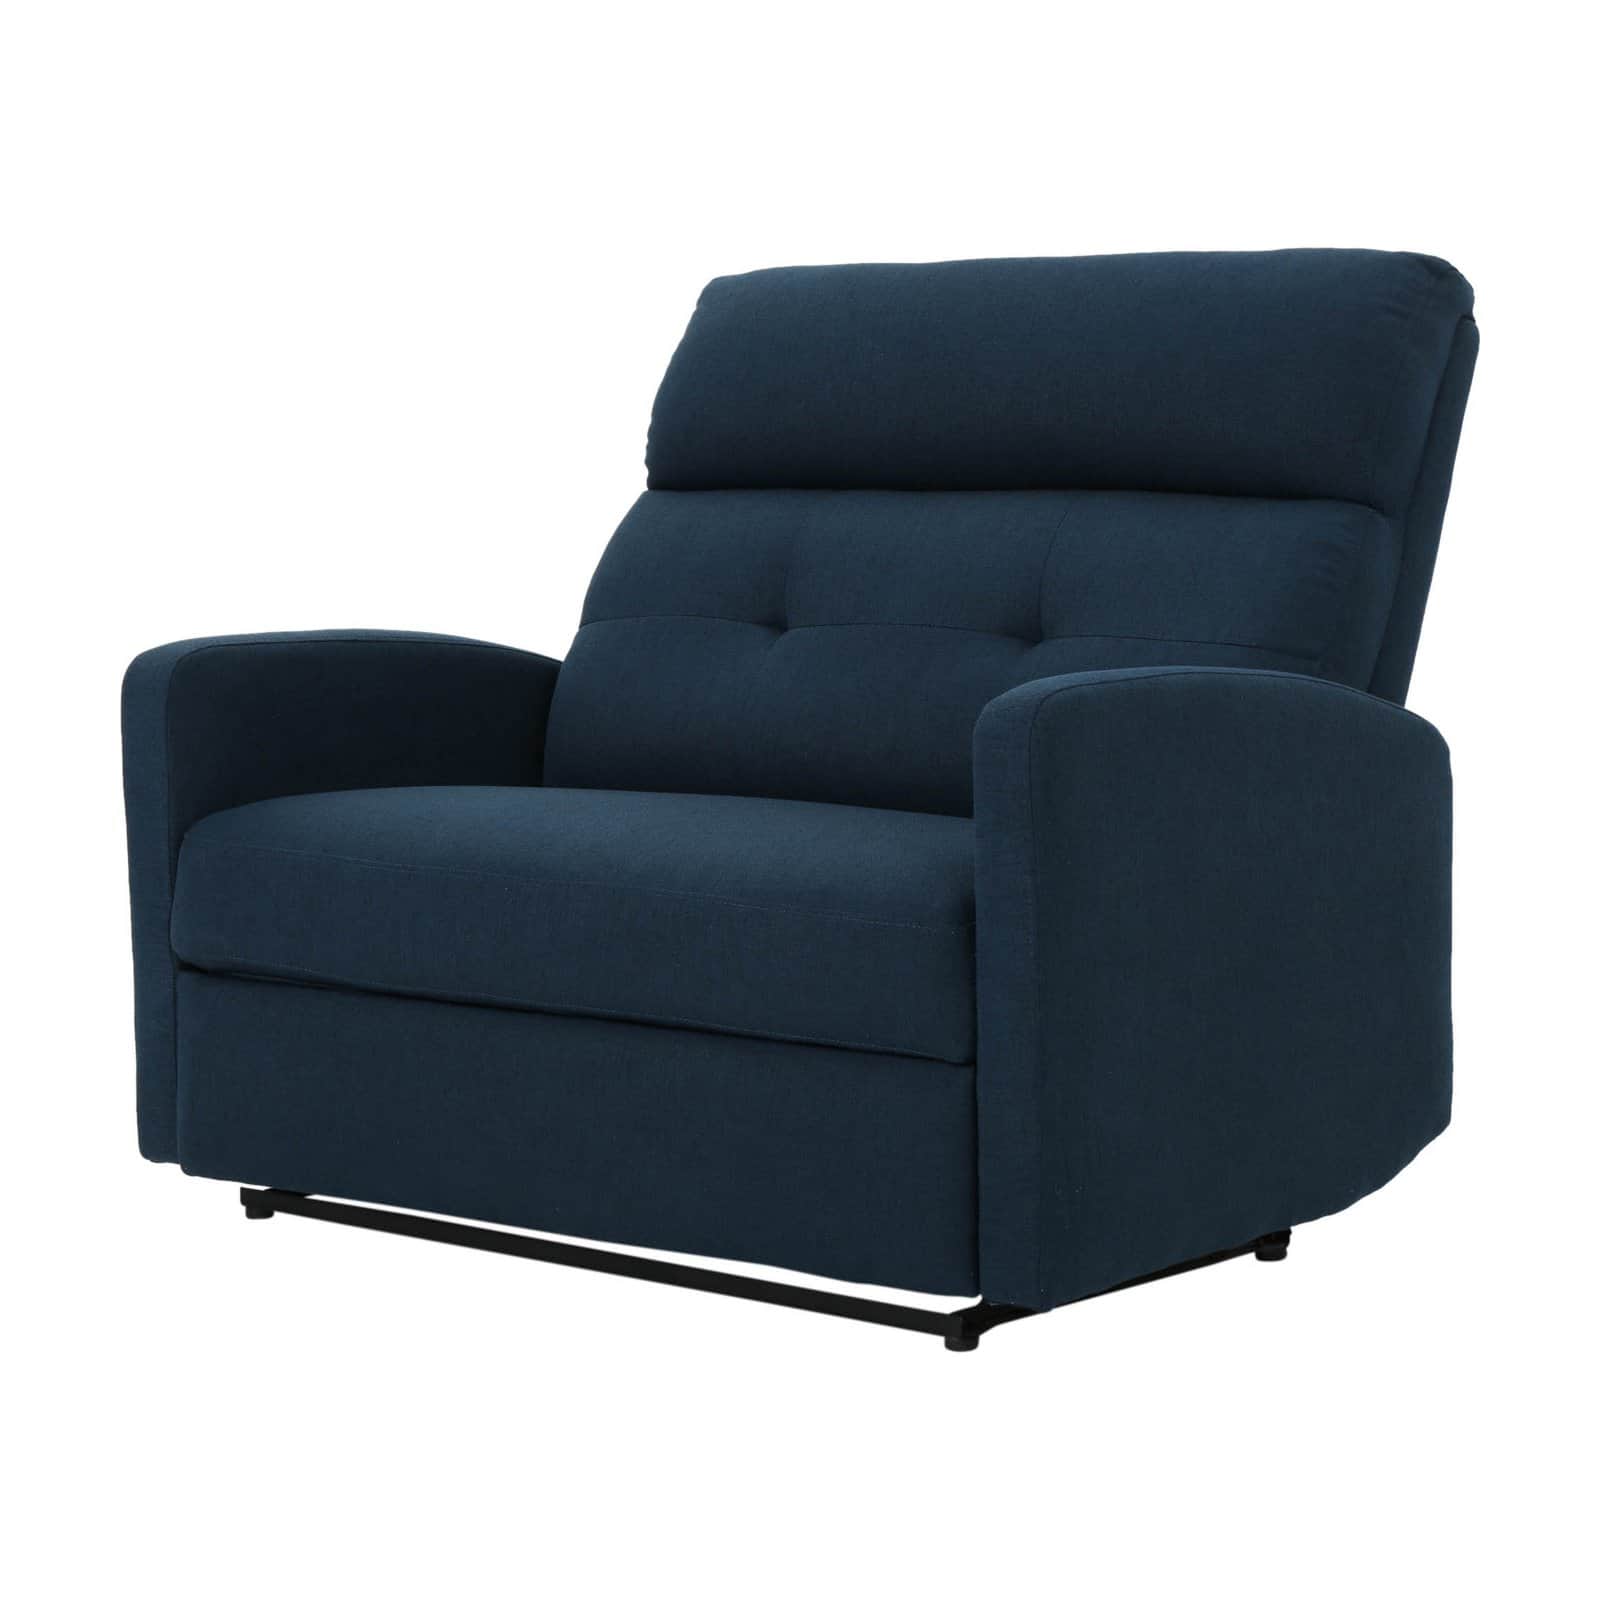 Halima Tufted 2 Seater Recliner - image 2 of 10